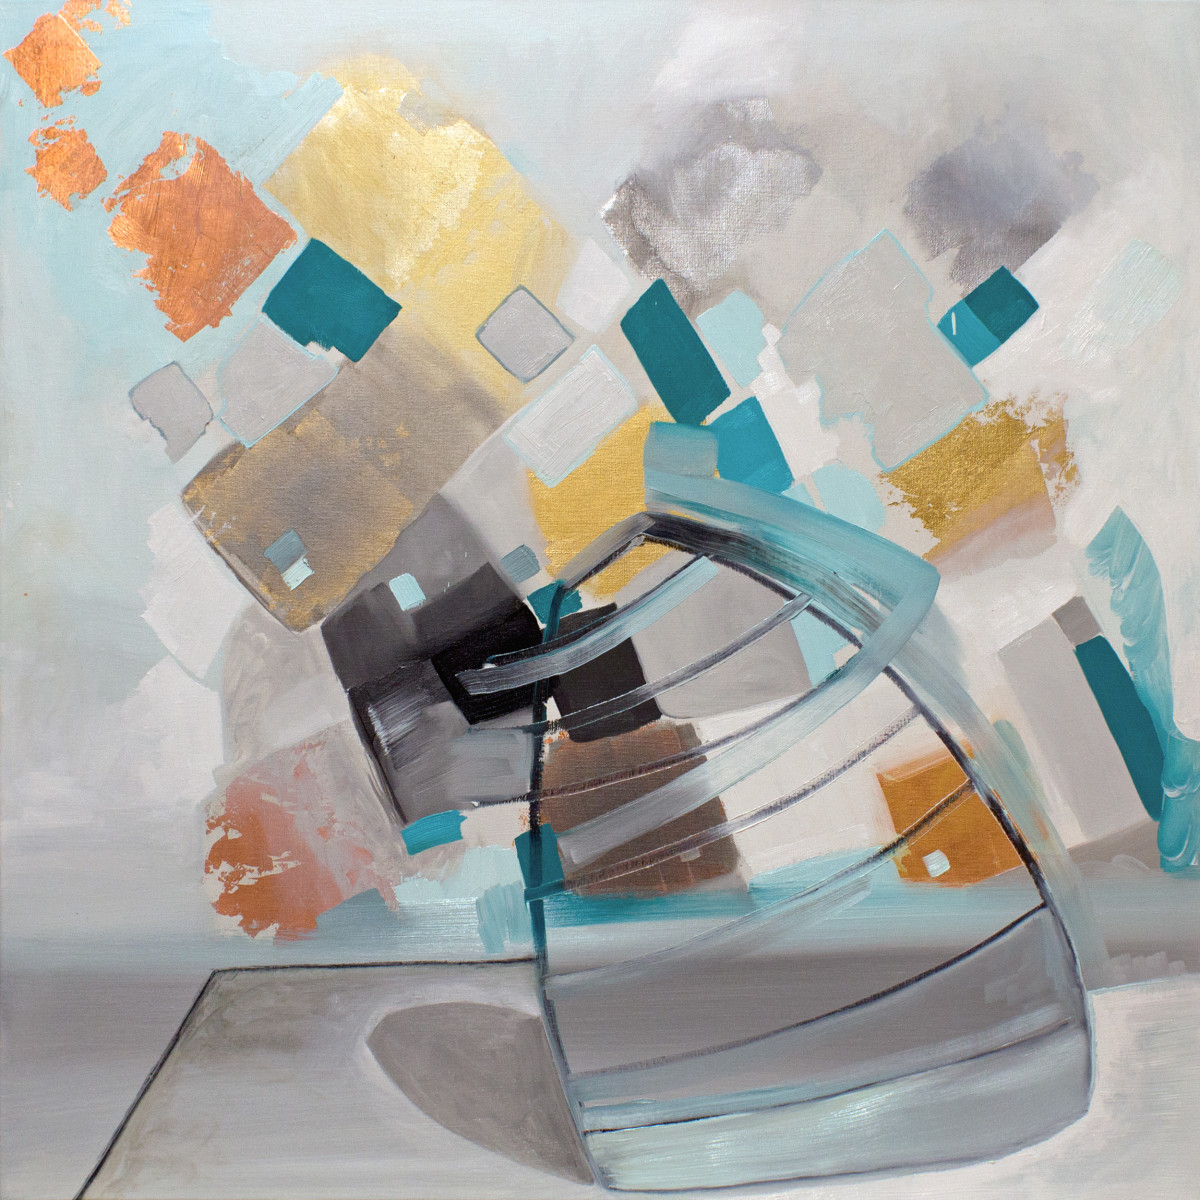 Abstract Study (table top) by Pamela Staker 